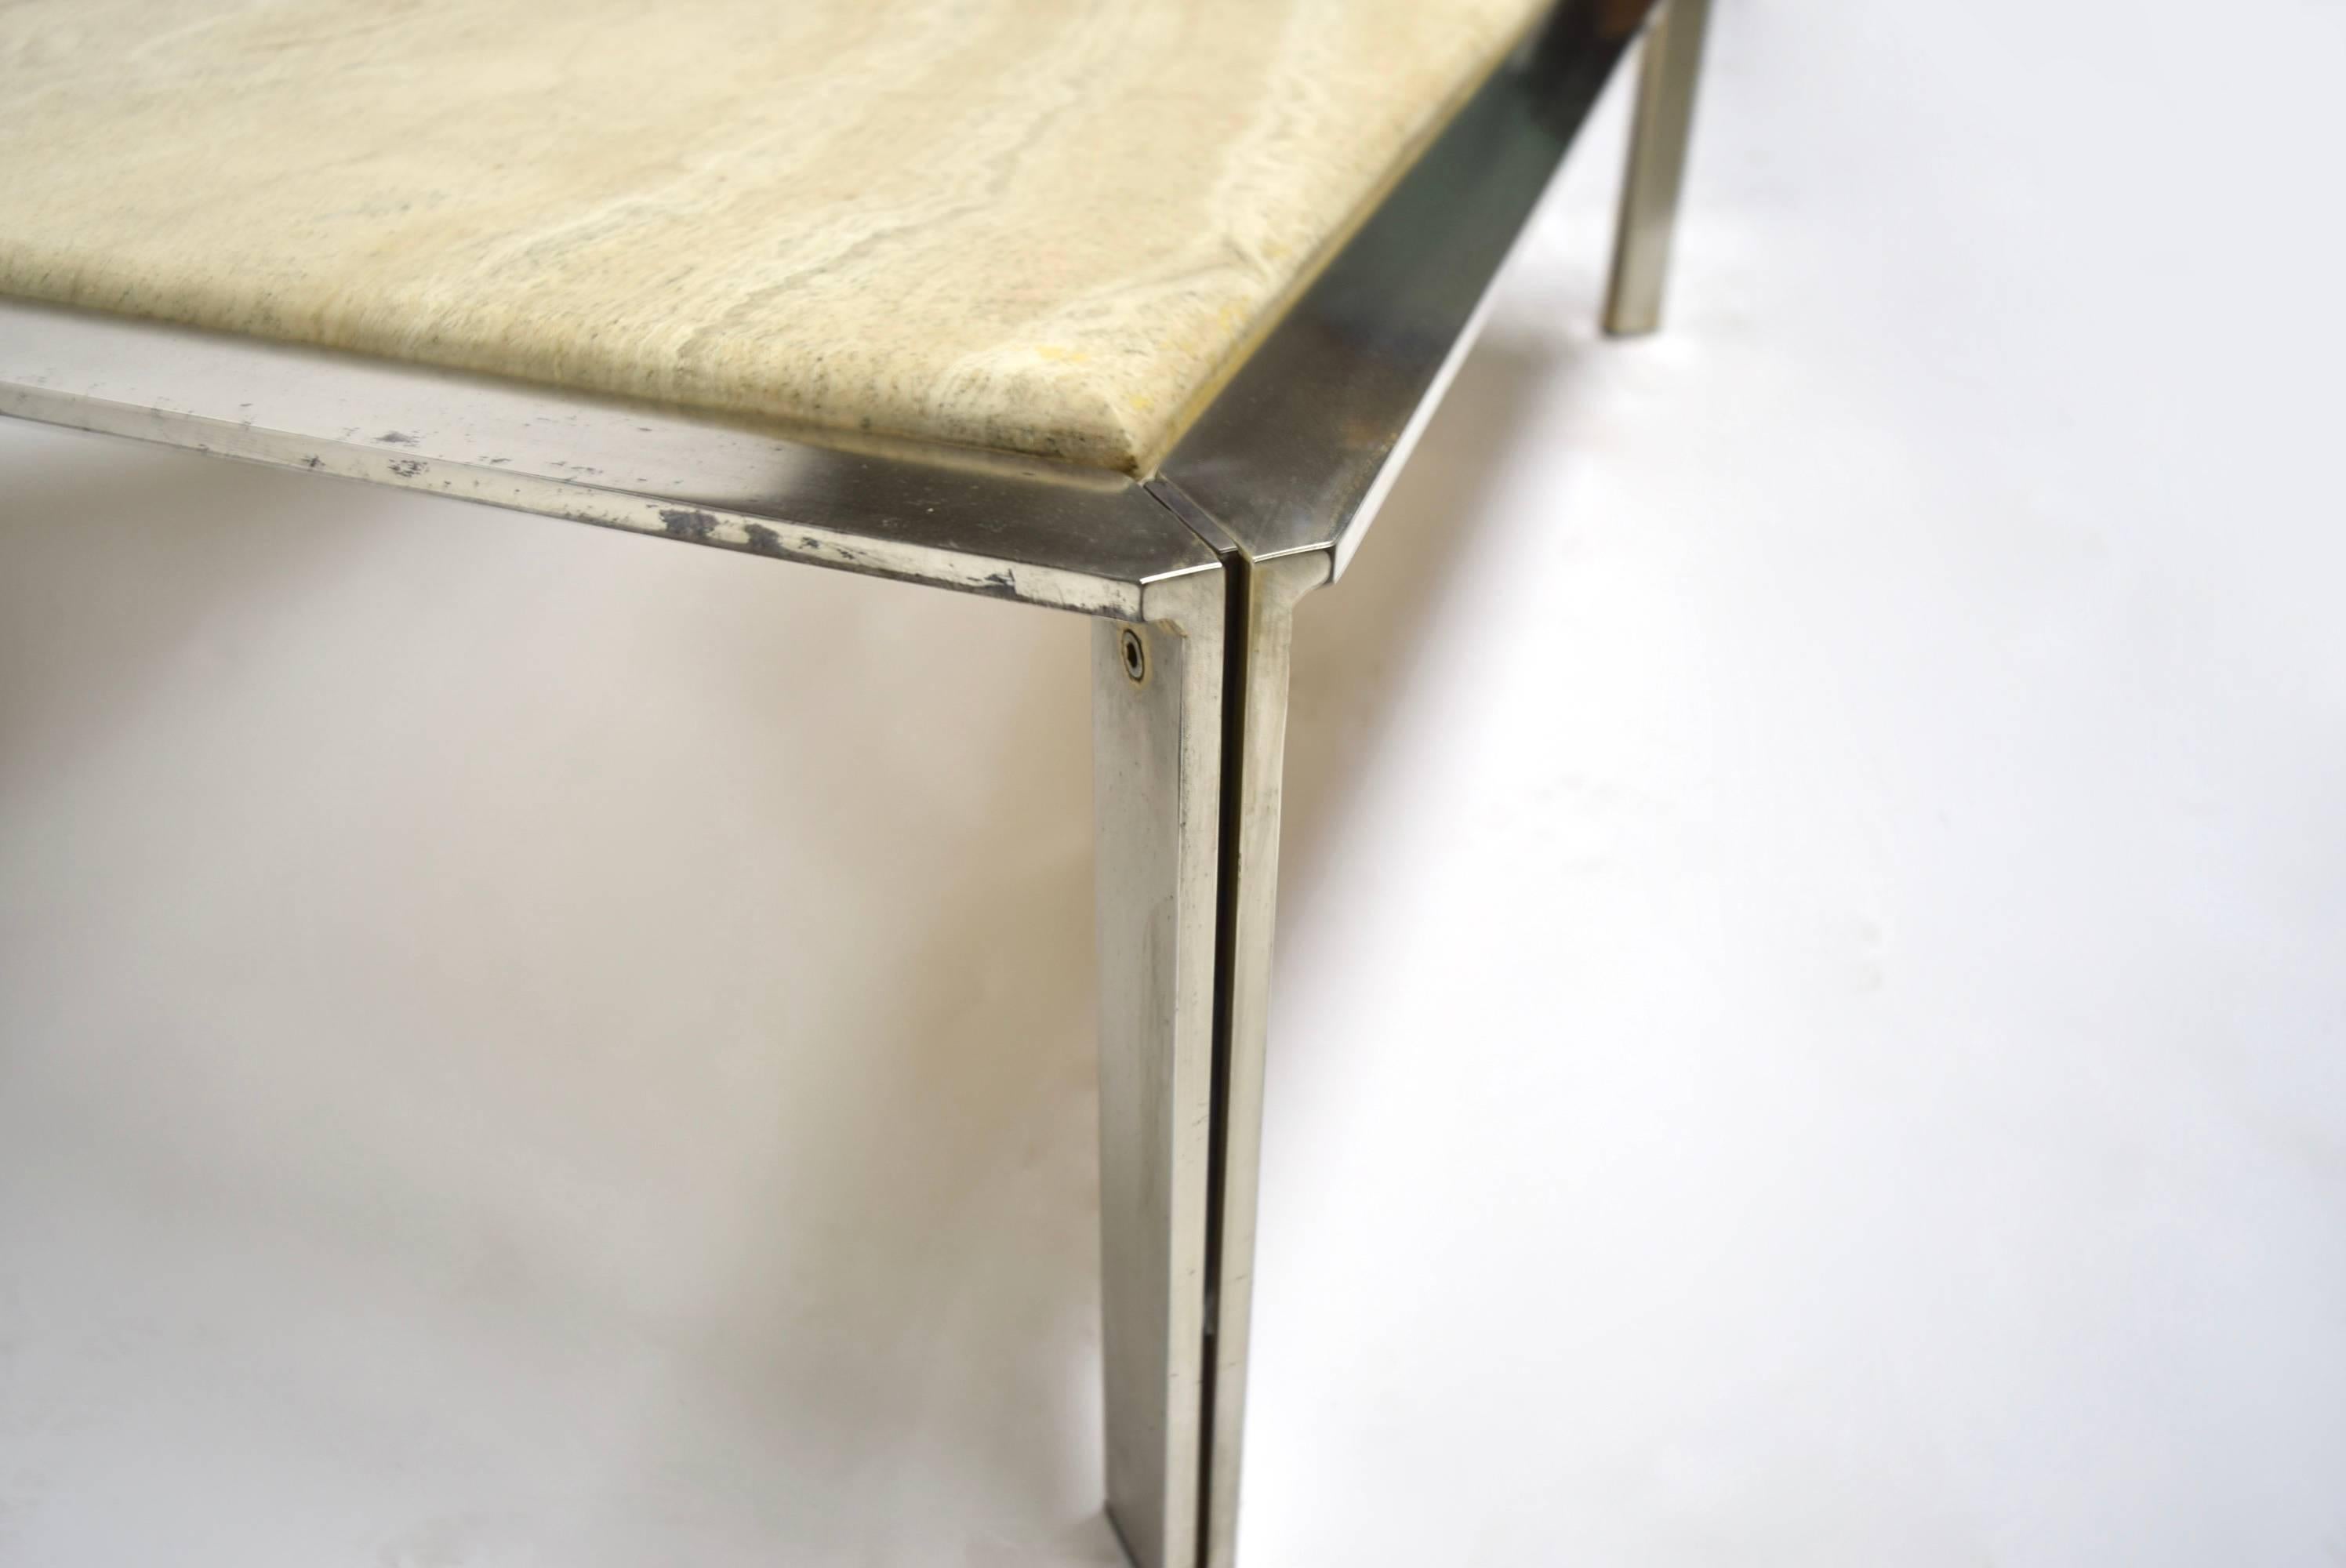 Late 20th Century Steel Coffee Table with a Travertine Top circa 1970, made in France For Sale